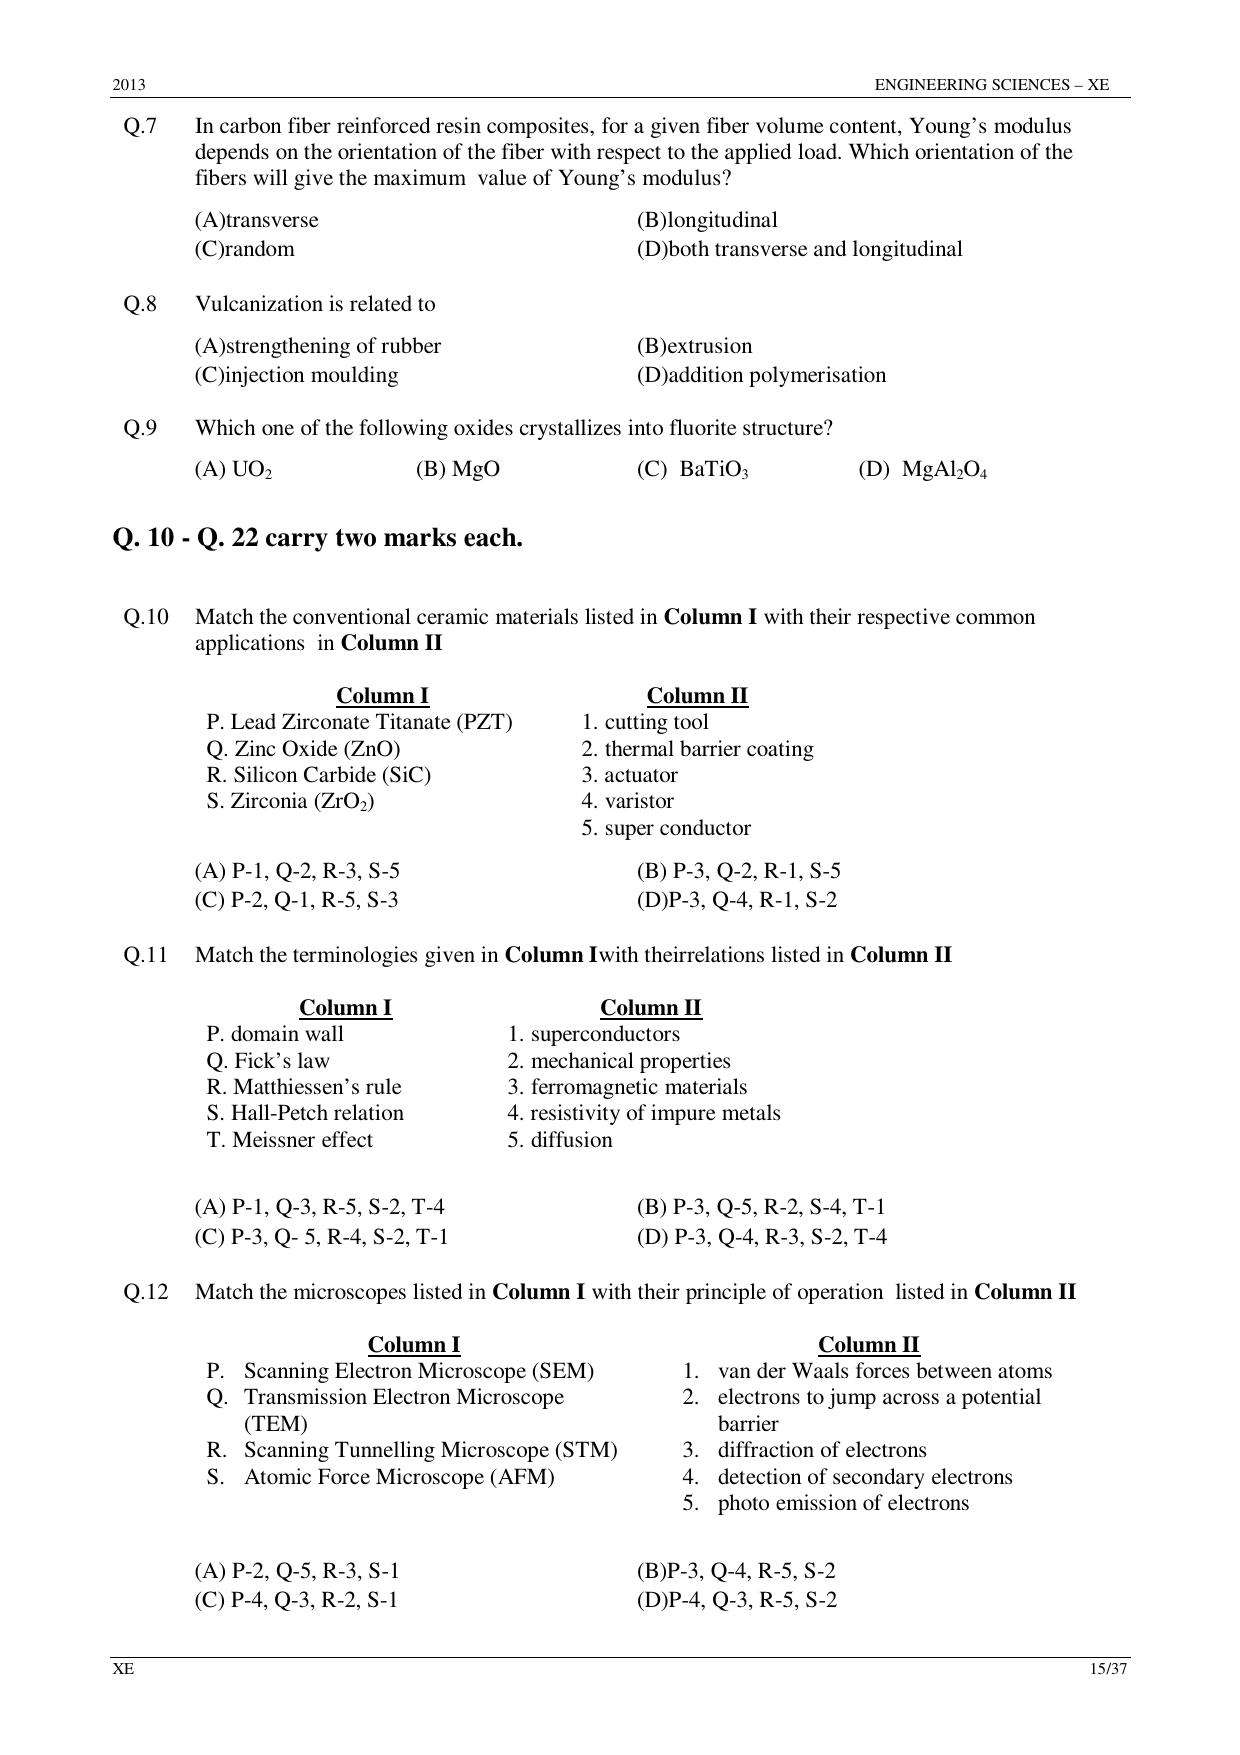 GATE 2013 Engineering Sciences (XE) Question Paper with Answer Key - Page 15